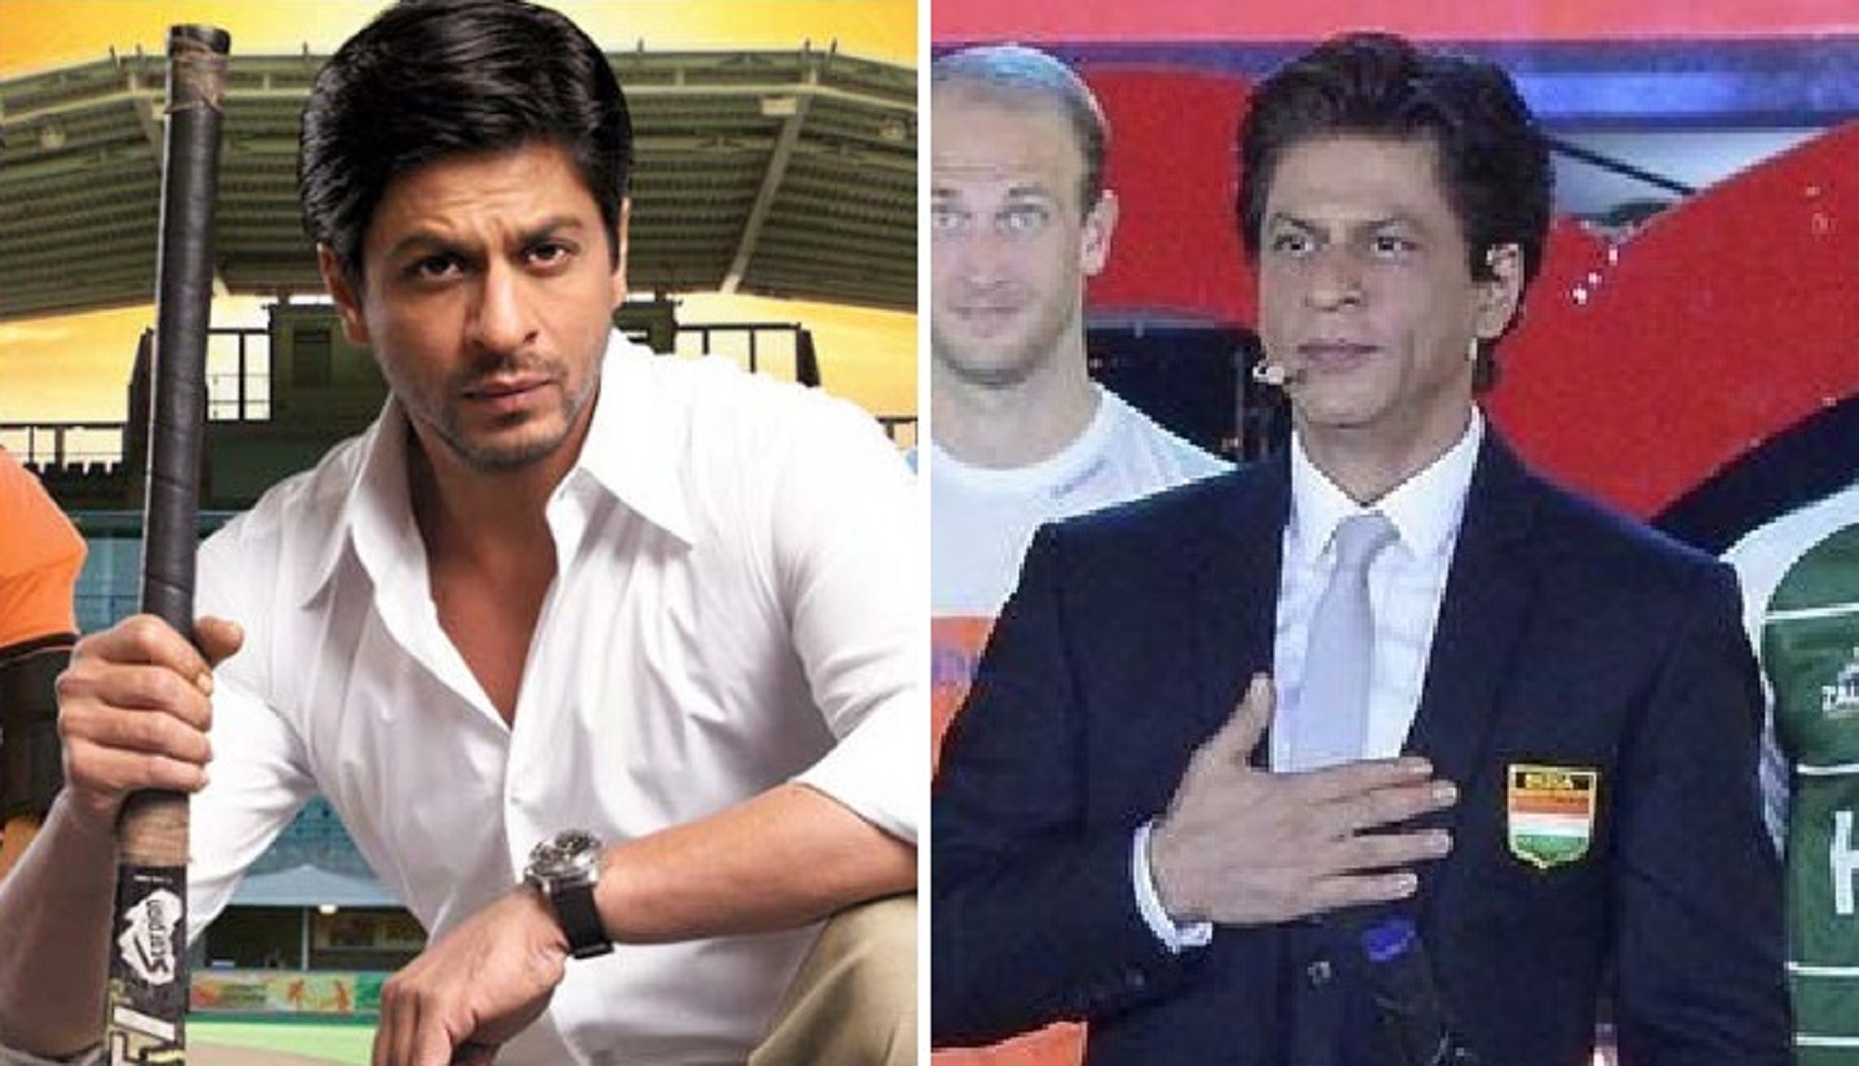 Srk Recites His Infamous 70 Minutes Dialogue From Chak De During Hockey World Cup Opening Ceremony Chak de india 70 minute monologue in my style can't match shahrukh sir but still tried my best. srk recites his infamous 70 minutes